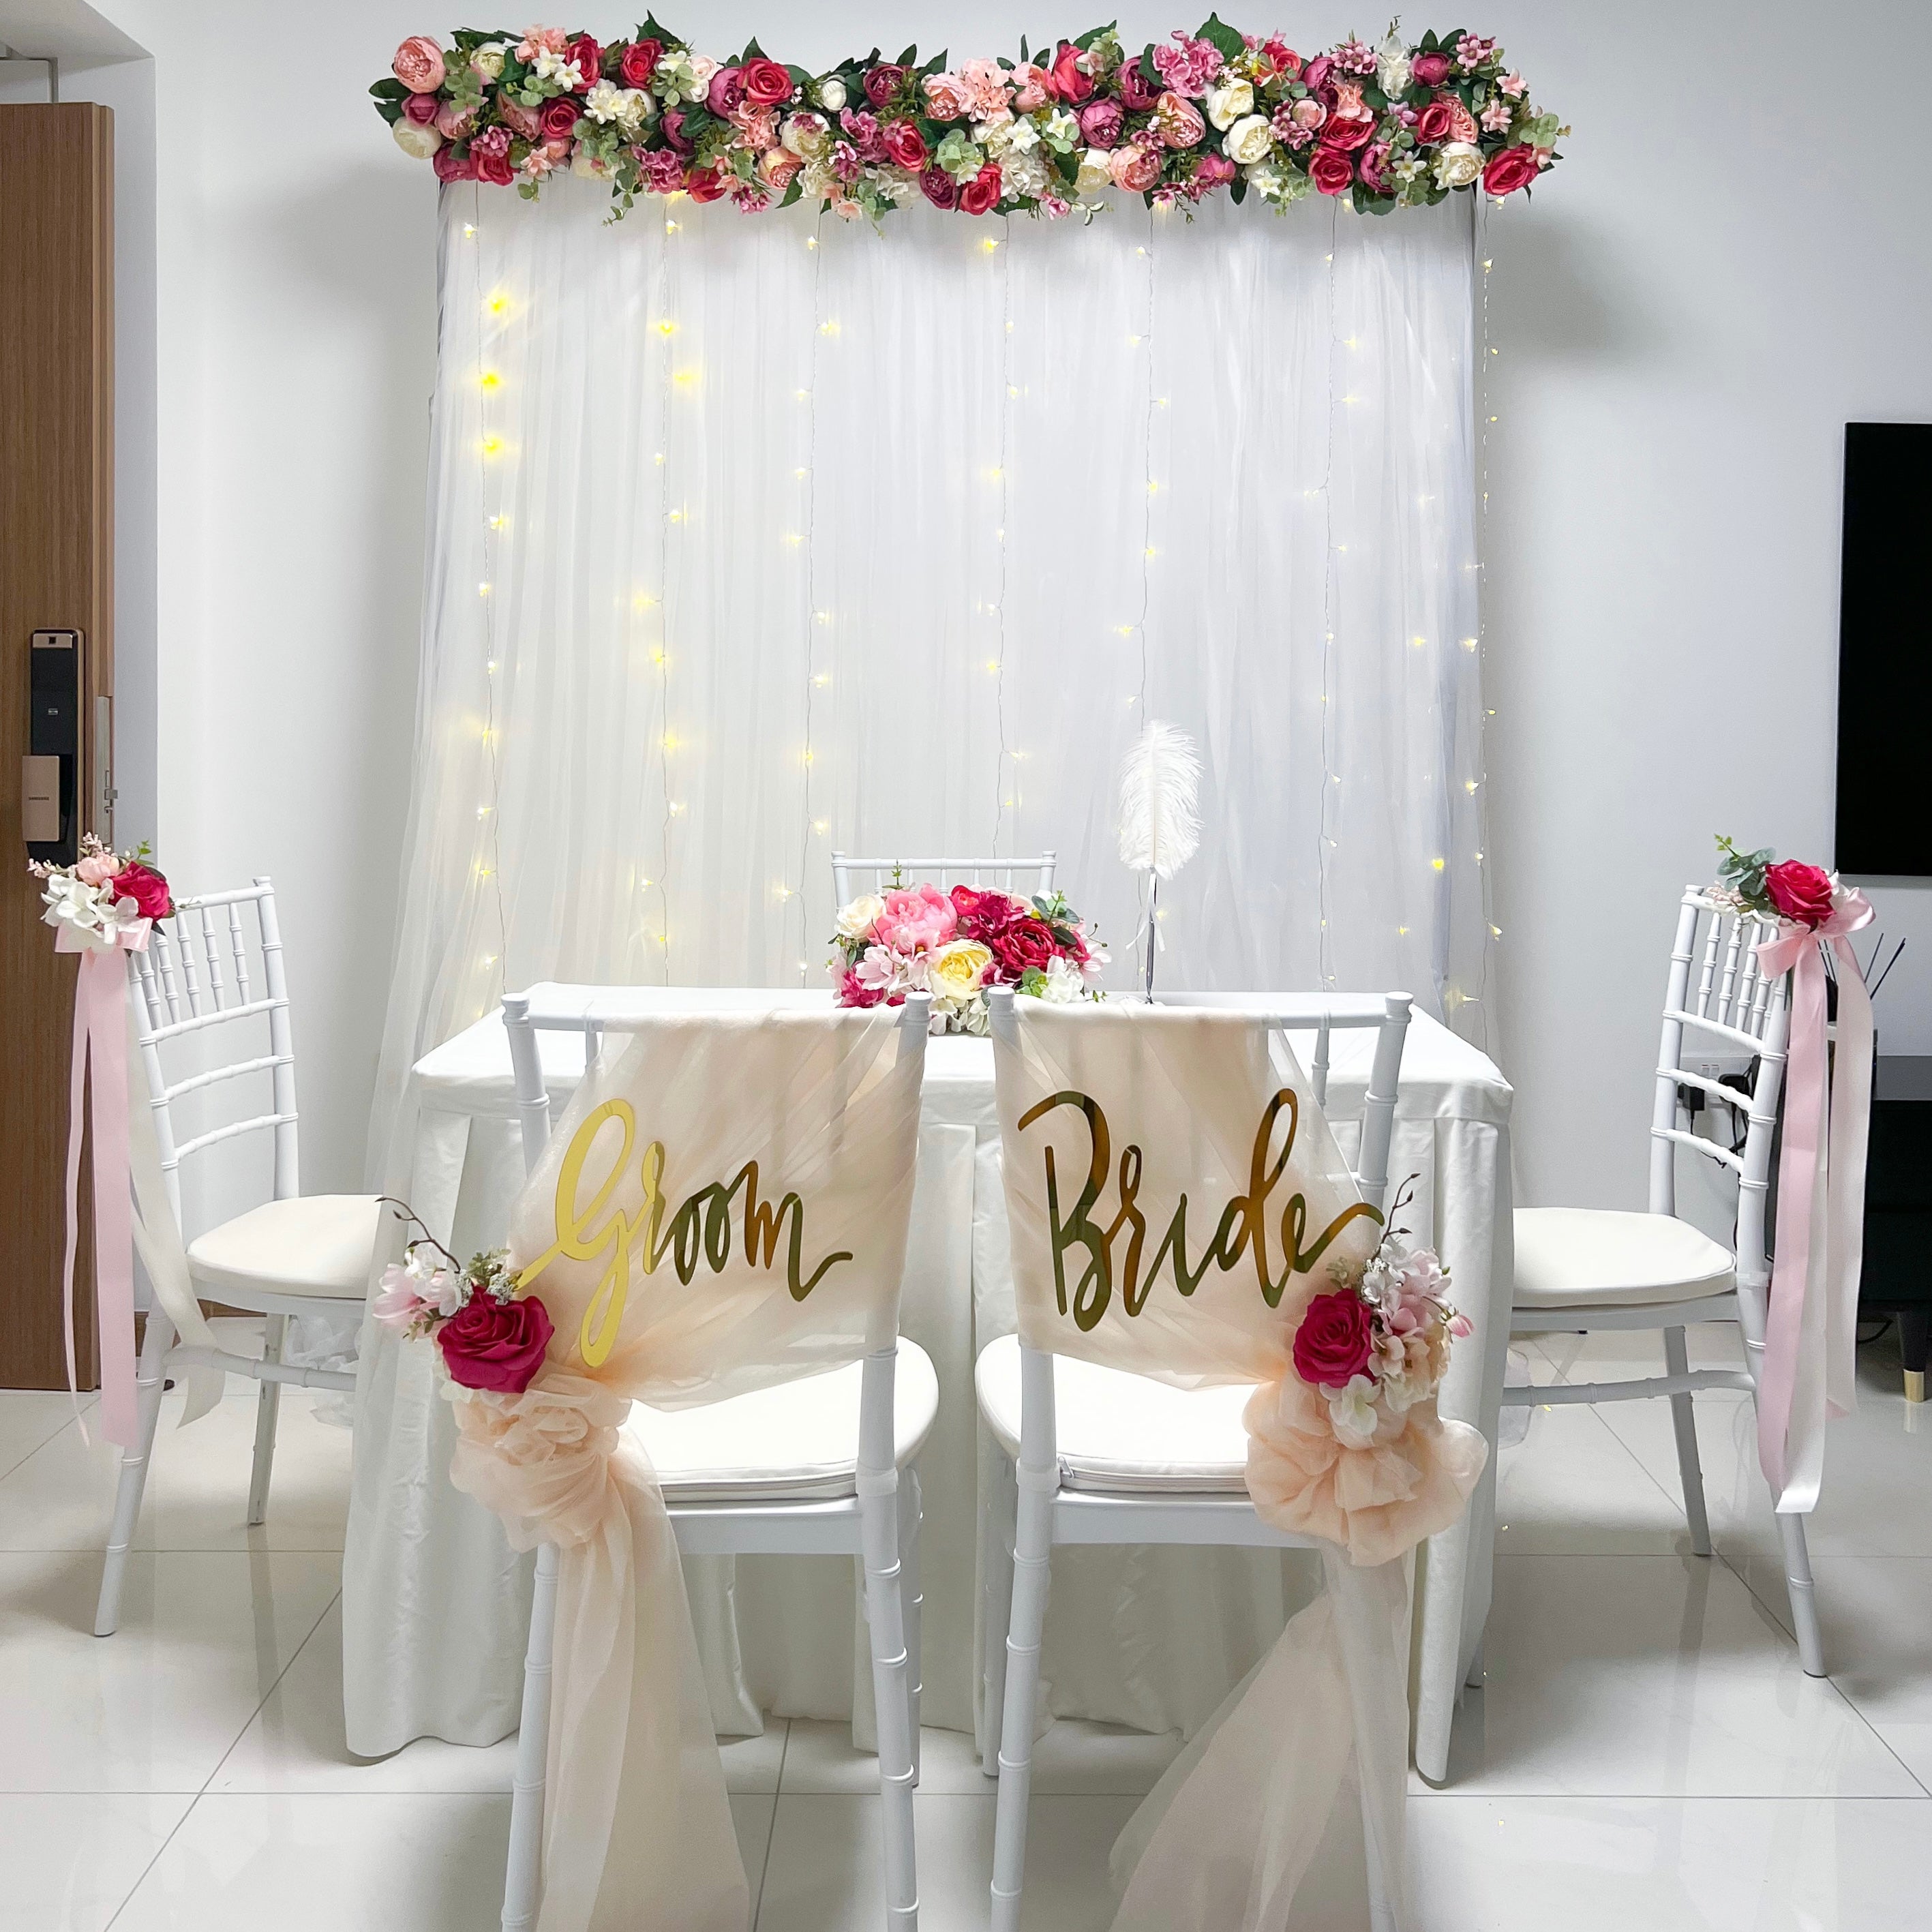 Sweet and Simple Home Solemnisation/ROM Decor in Singapore - Pink & White Theme with Fairy-lights